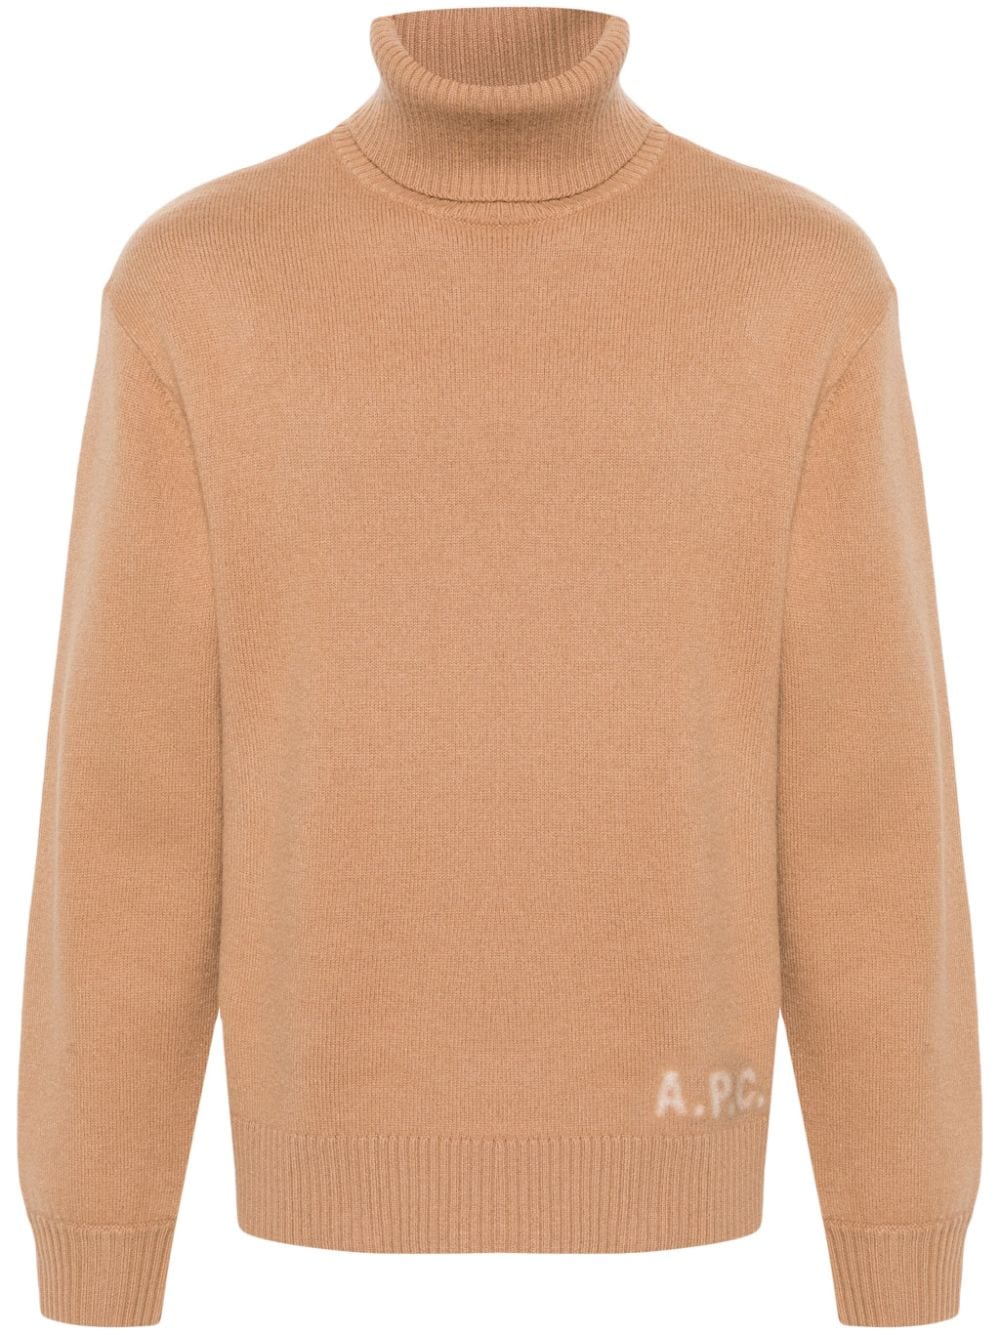 Apc Walter Knitted Jumper In Brown